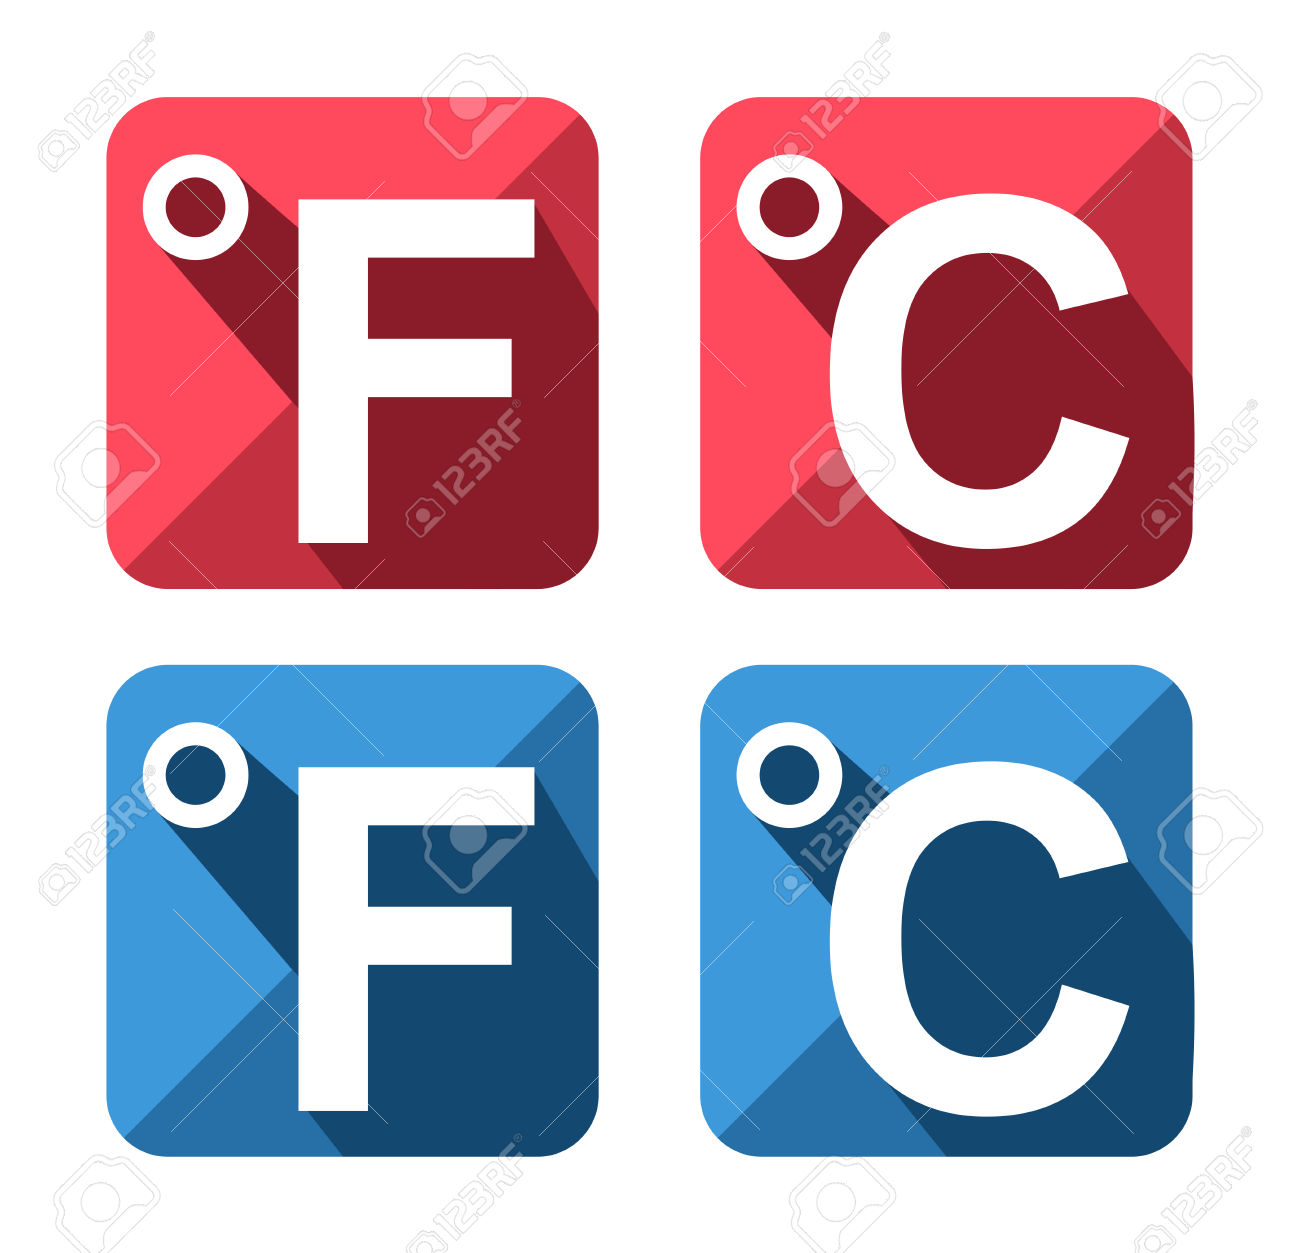 Celsius And Fahrenheit Symbol Icon Set Royalty Free Cliparts.